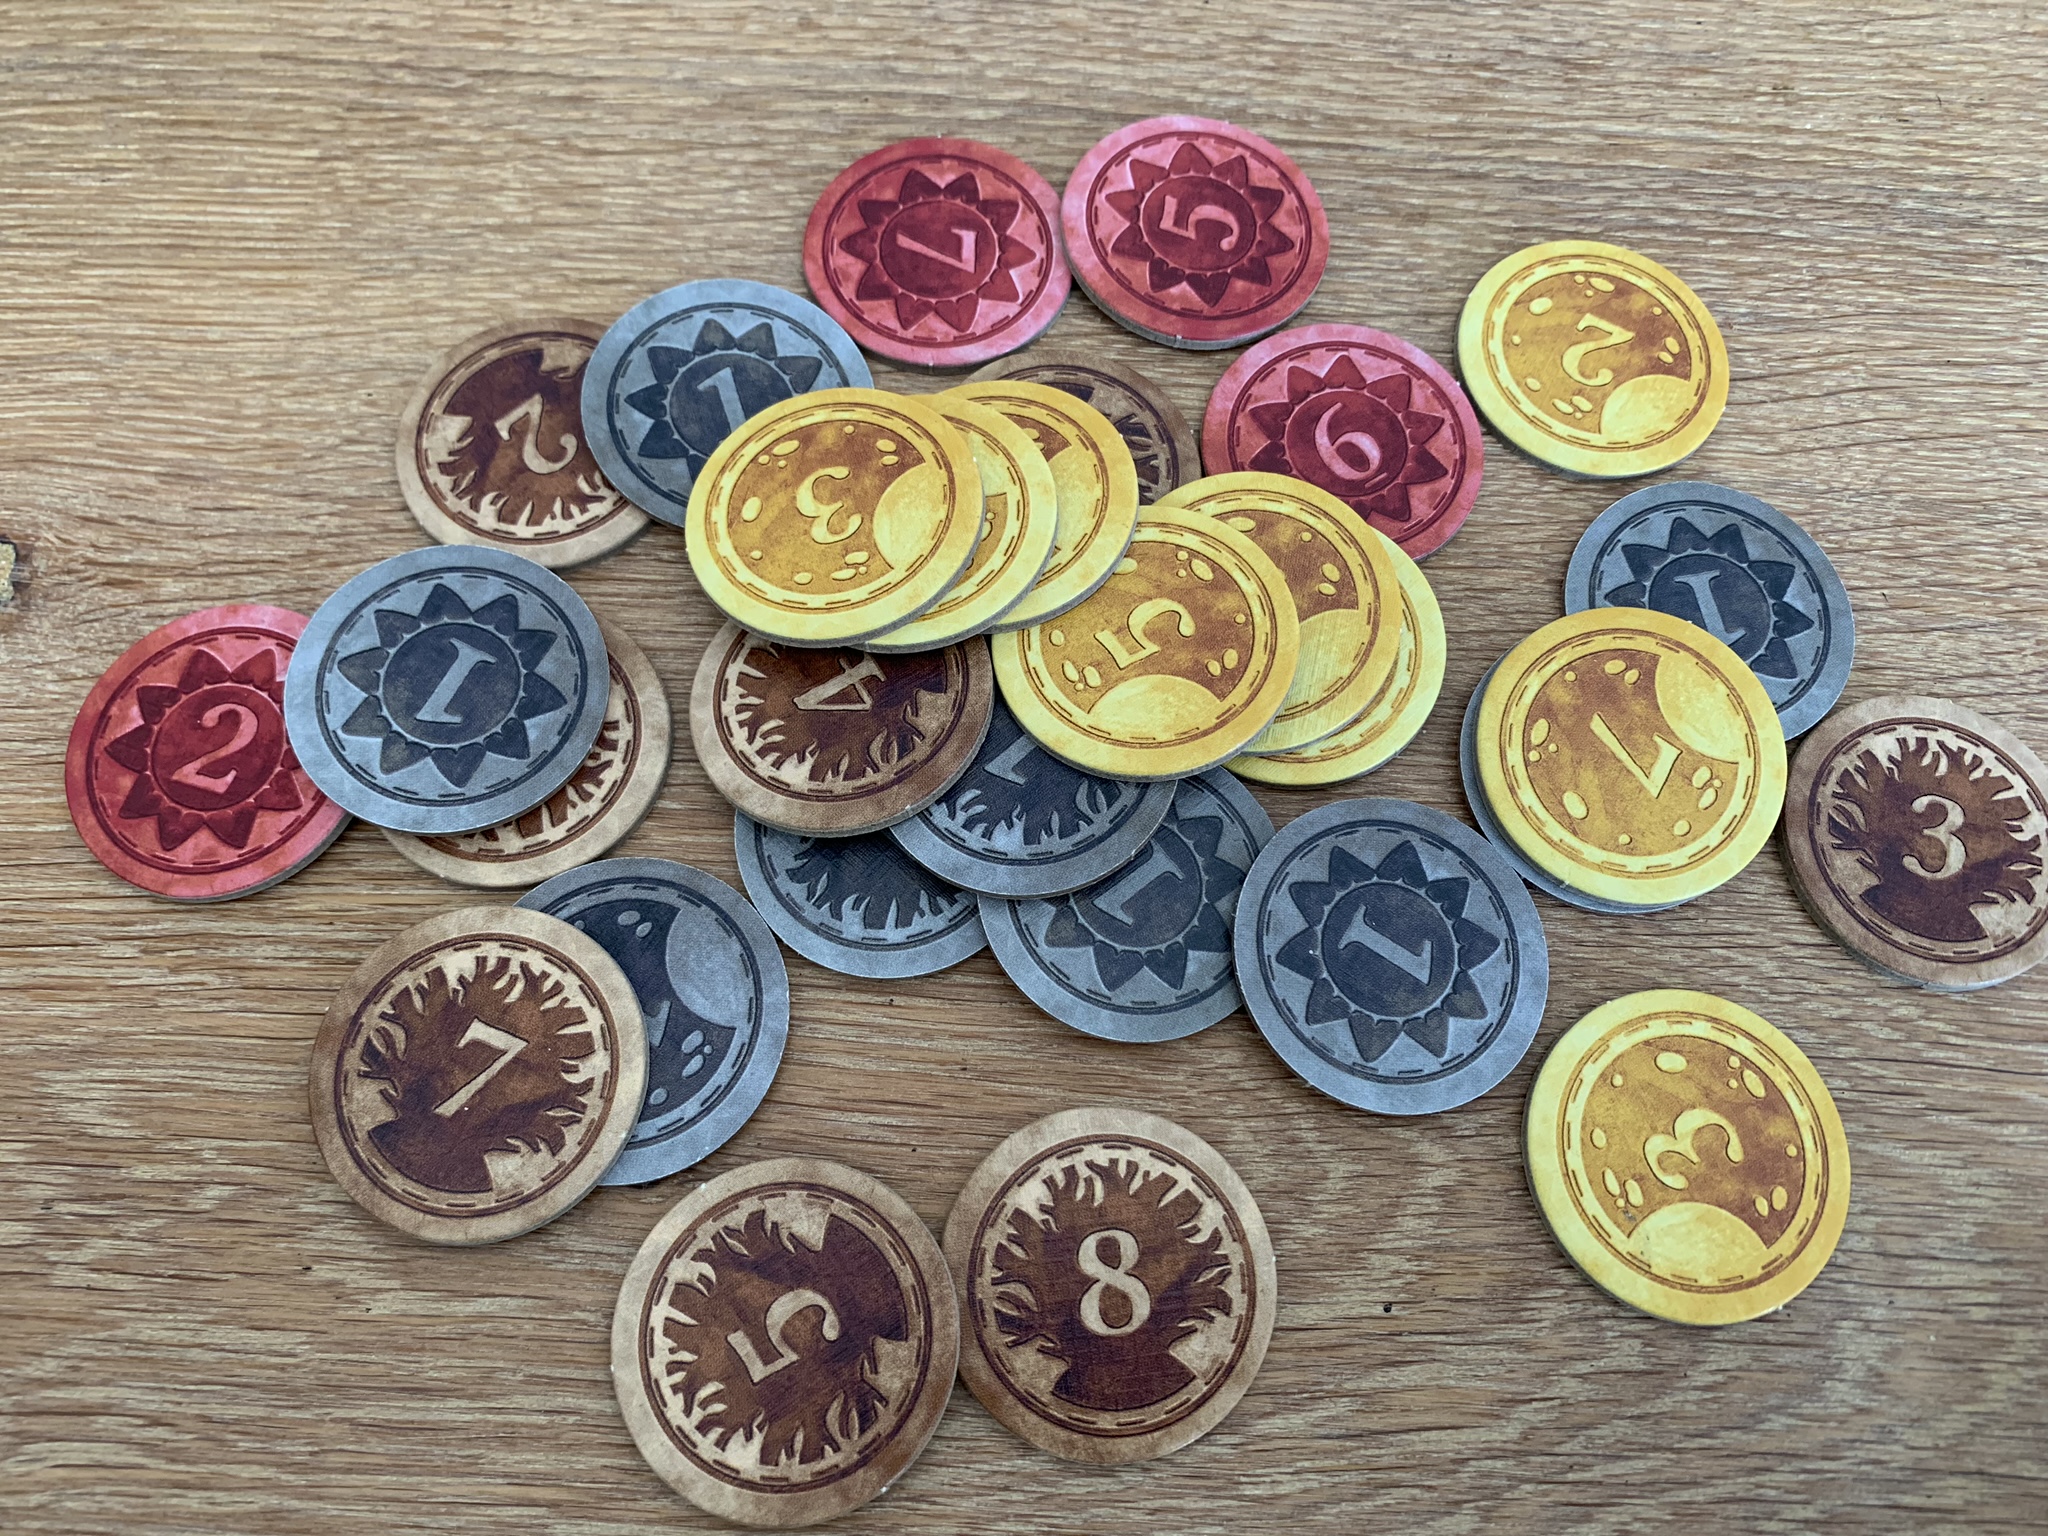 Point tokens - 3 colors with grey on the other side